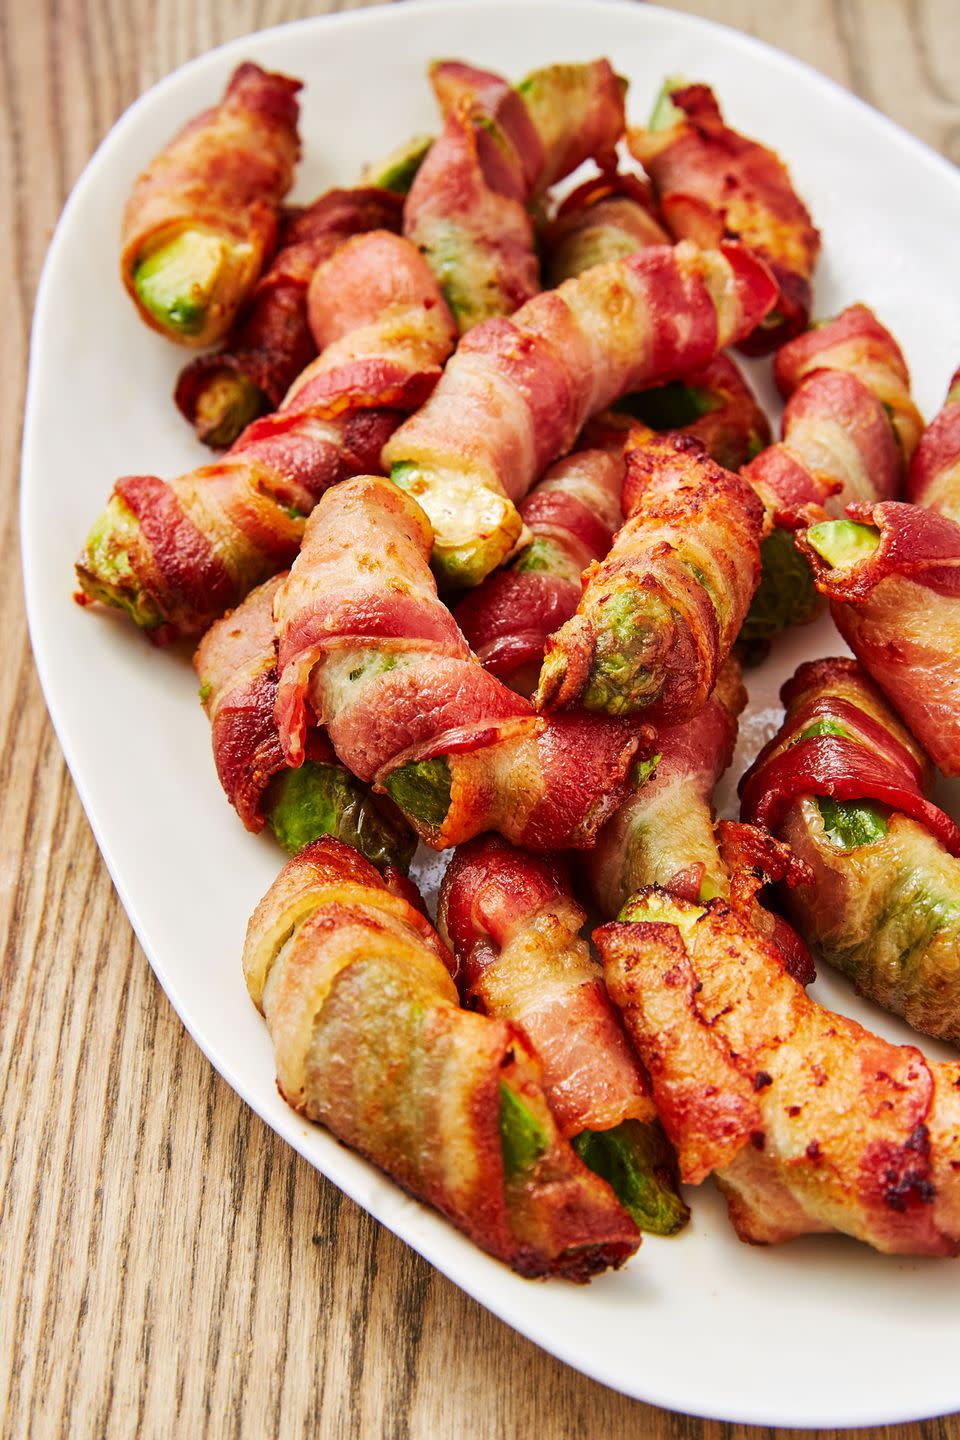 <p>You can't say no to anything wrapped in bacon. </p><p>Get the recipe from <a href="https://www.delish.com/cooking/recipe-ideas/recipes/a48261/bacon-avocado-fries-recipe/" rel="nofollow noopener" target="_blank" data-ylk="slk:Delish" class="link ">Delish</a>.</p>